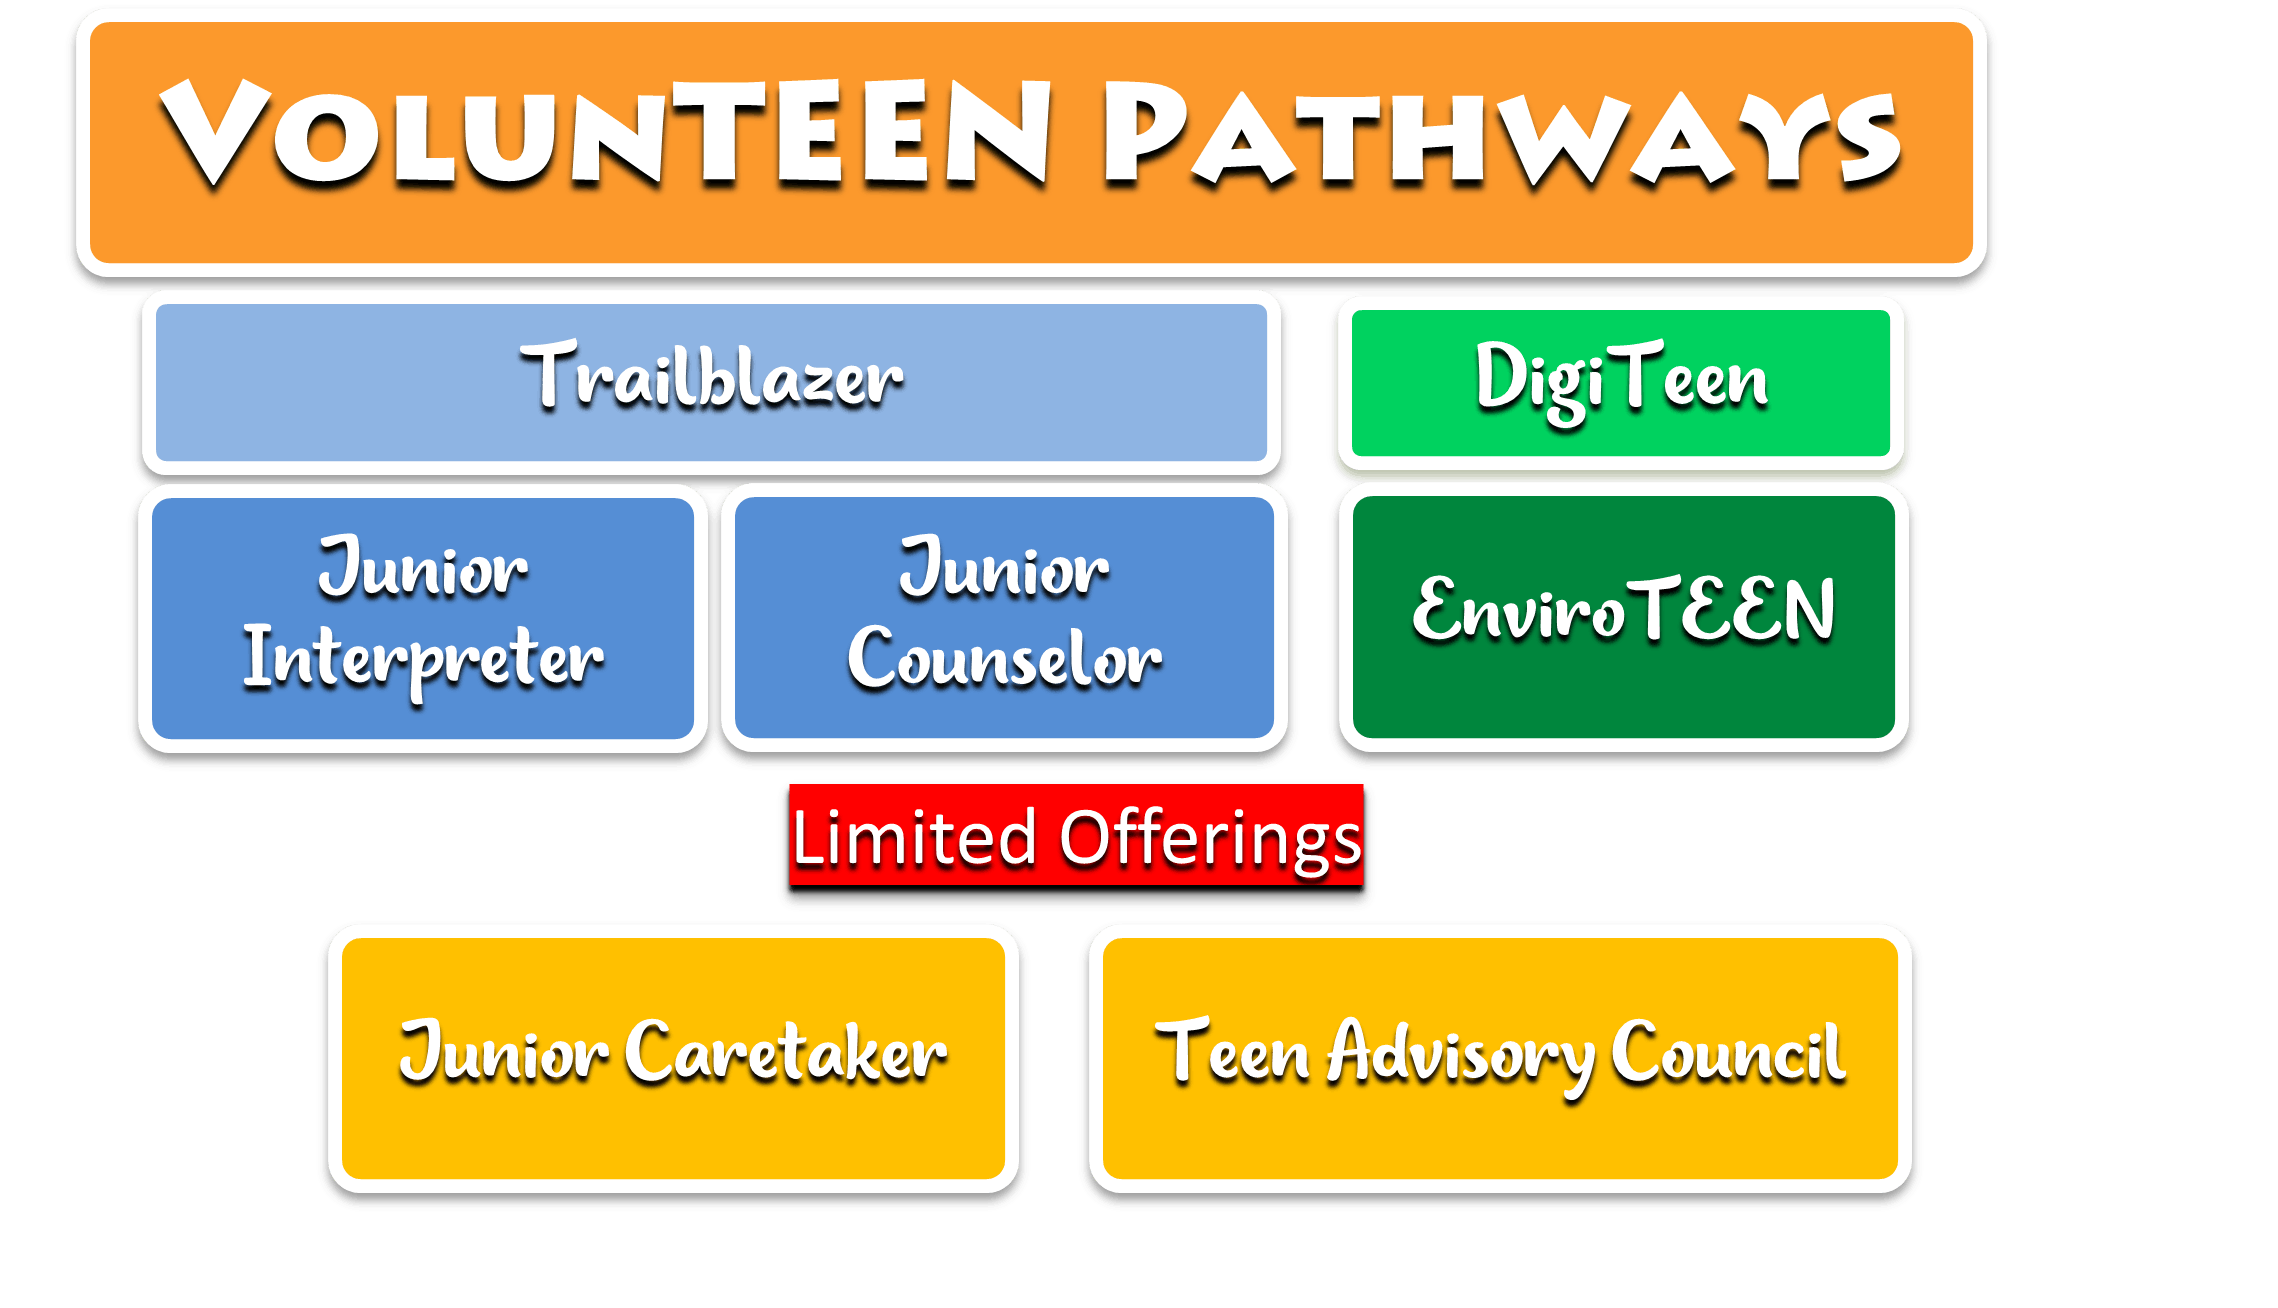 Available VolunTEEN pathways include the following: Trailblazer, Junior Interpreter, and Junior Counselor; DigiTeen and EnviroTEEN. Limited Offerings include Junior Caretaker and Teen Advisory Council.